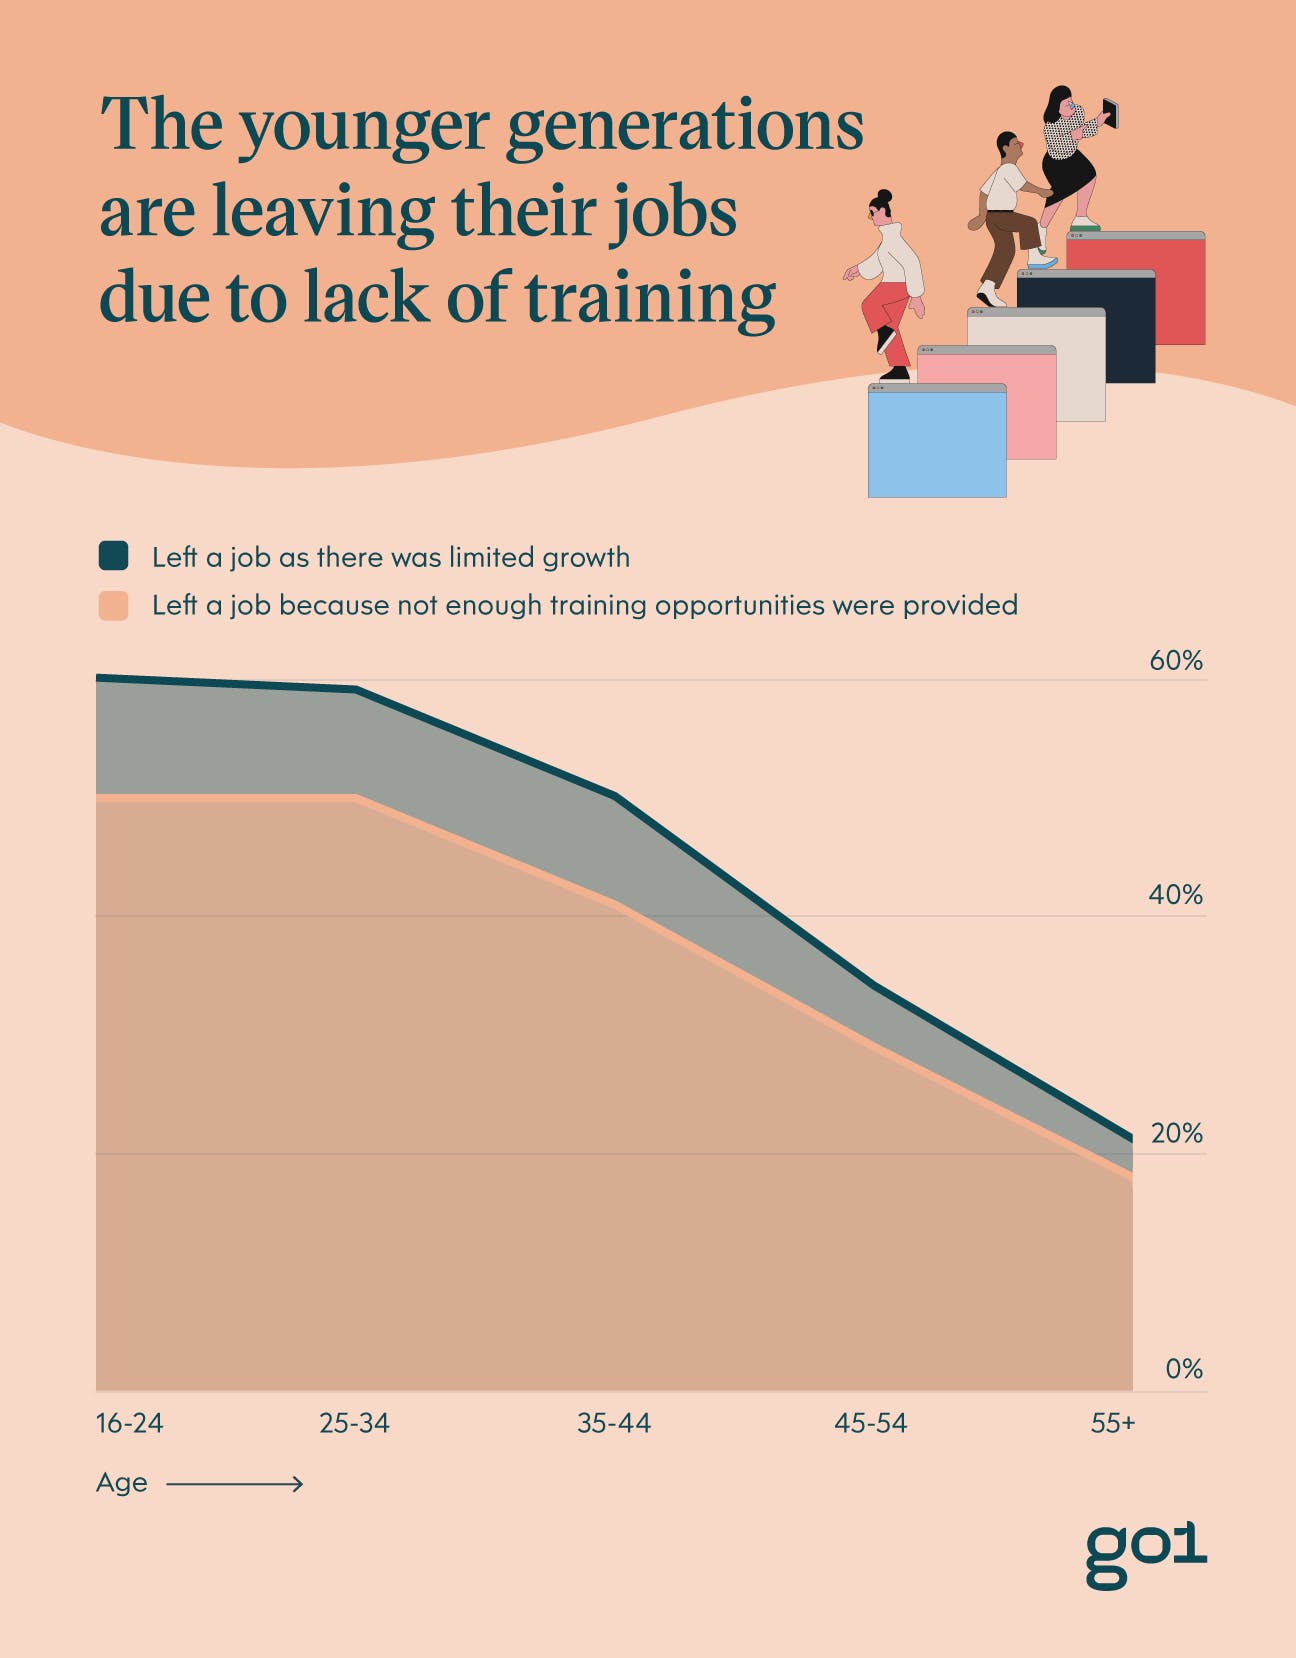 Graph showing percentage of workers leaving their jobs due to poor training